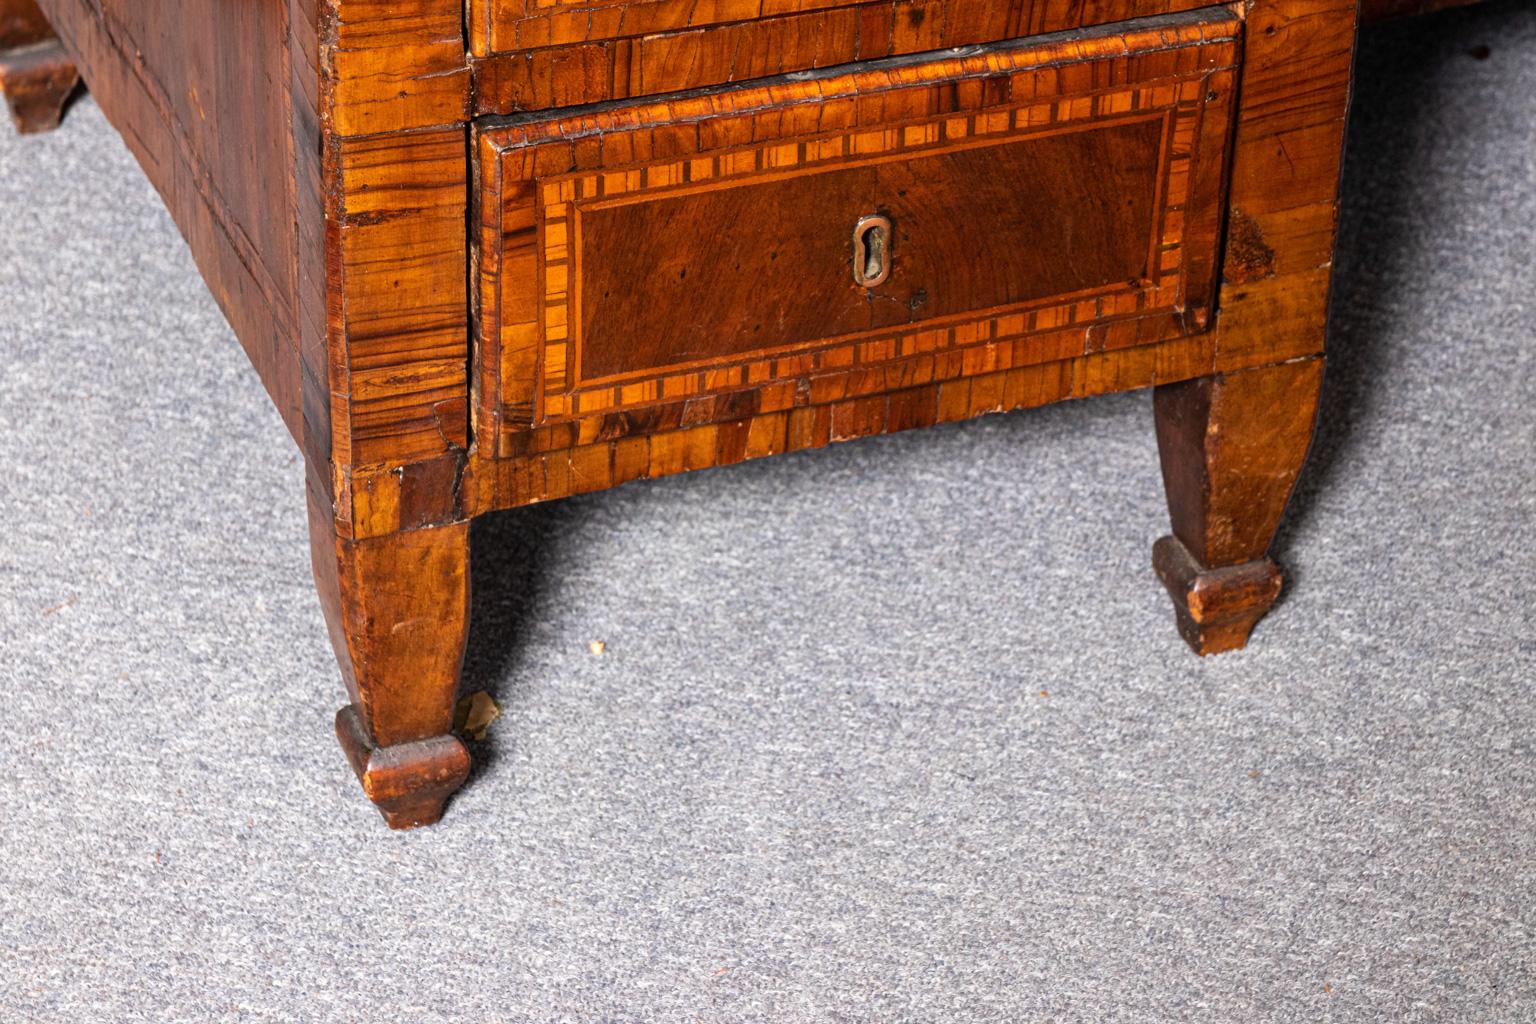 Italian inlaid partner's desk with nine working inlaid drawers and further inlay throughout, circa 18th century. The piece also features walnut veneer and soft wood. Please note of further wear consistent with age including some veneer repair,